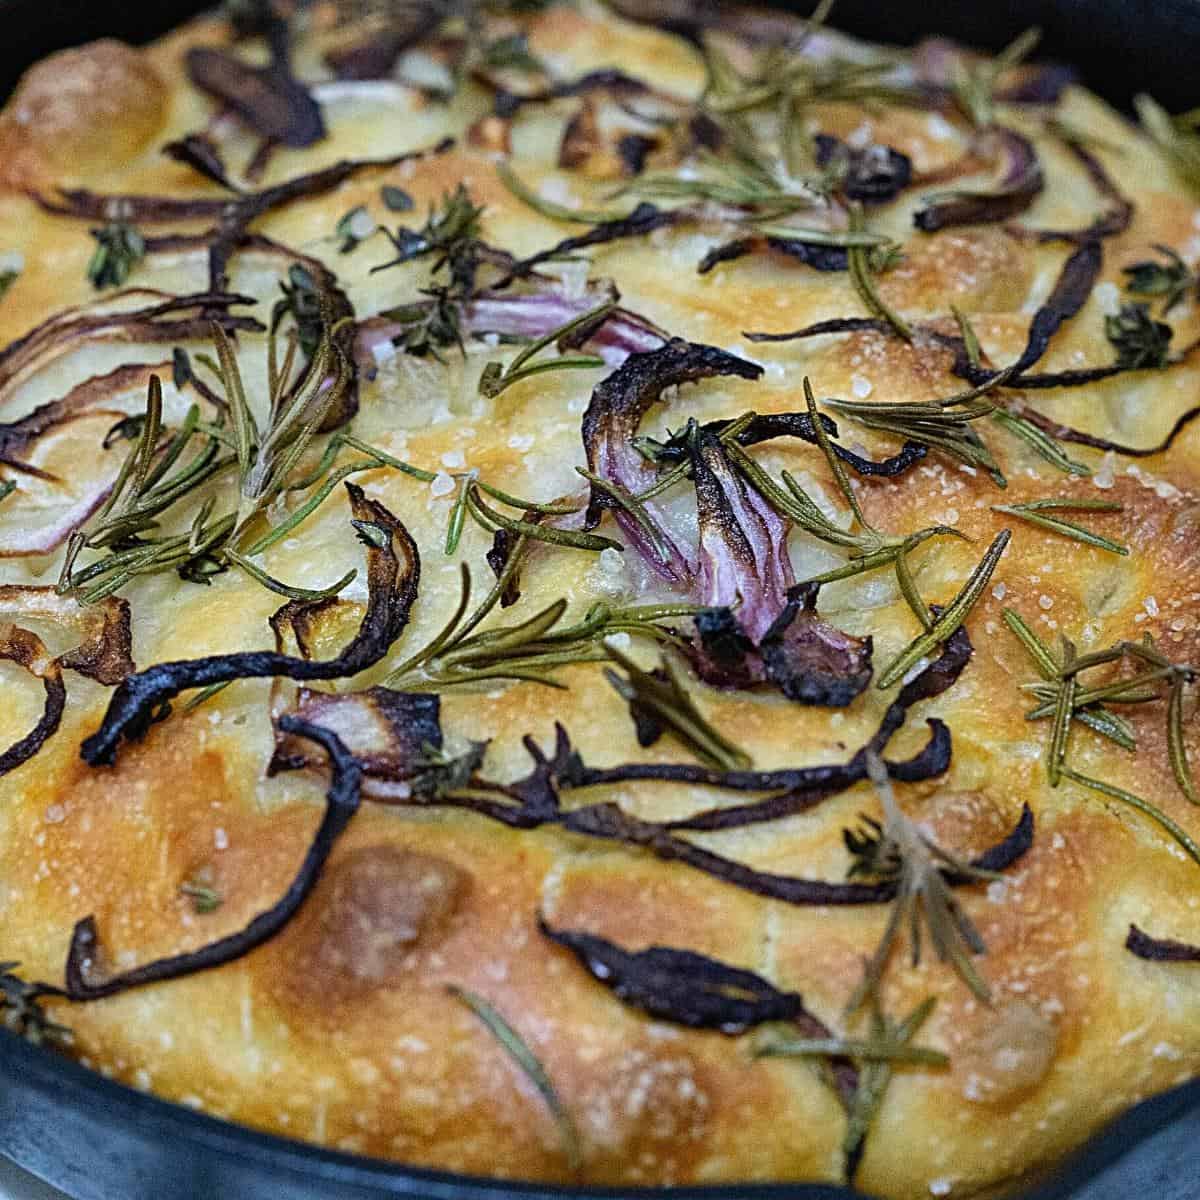 A focaccia with rosemary and red onions.